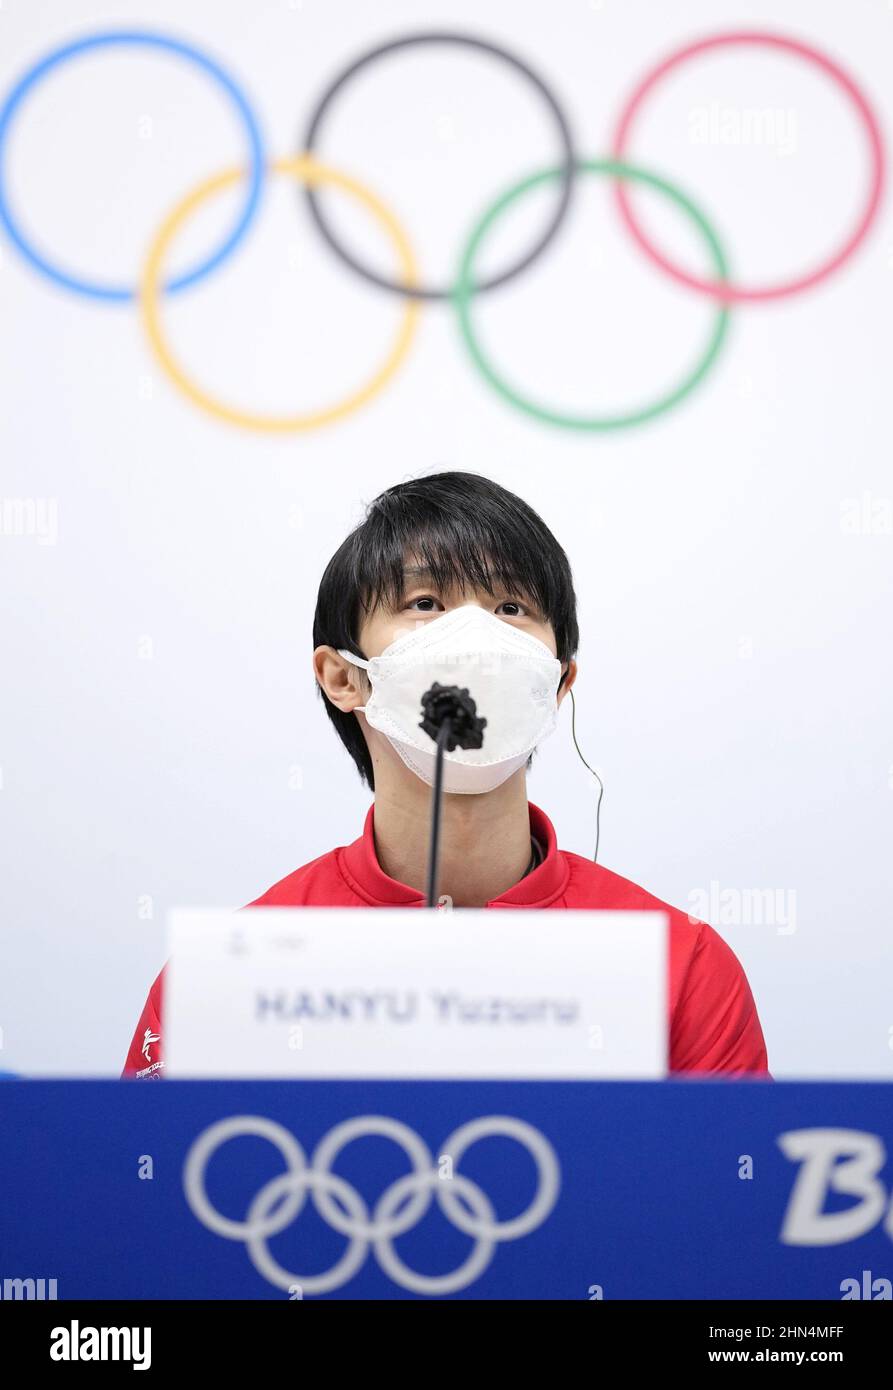 Beijing, China. 14th February, 2022. Japanese figure skater Yuzuru Hanyu  speaks at a press conference in Beijing during the Winter Olympics on Feb.  14, 2022. (Kyodo)==Kyodo Photo via Credit: Newscom/Alamy Live News